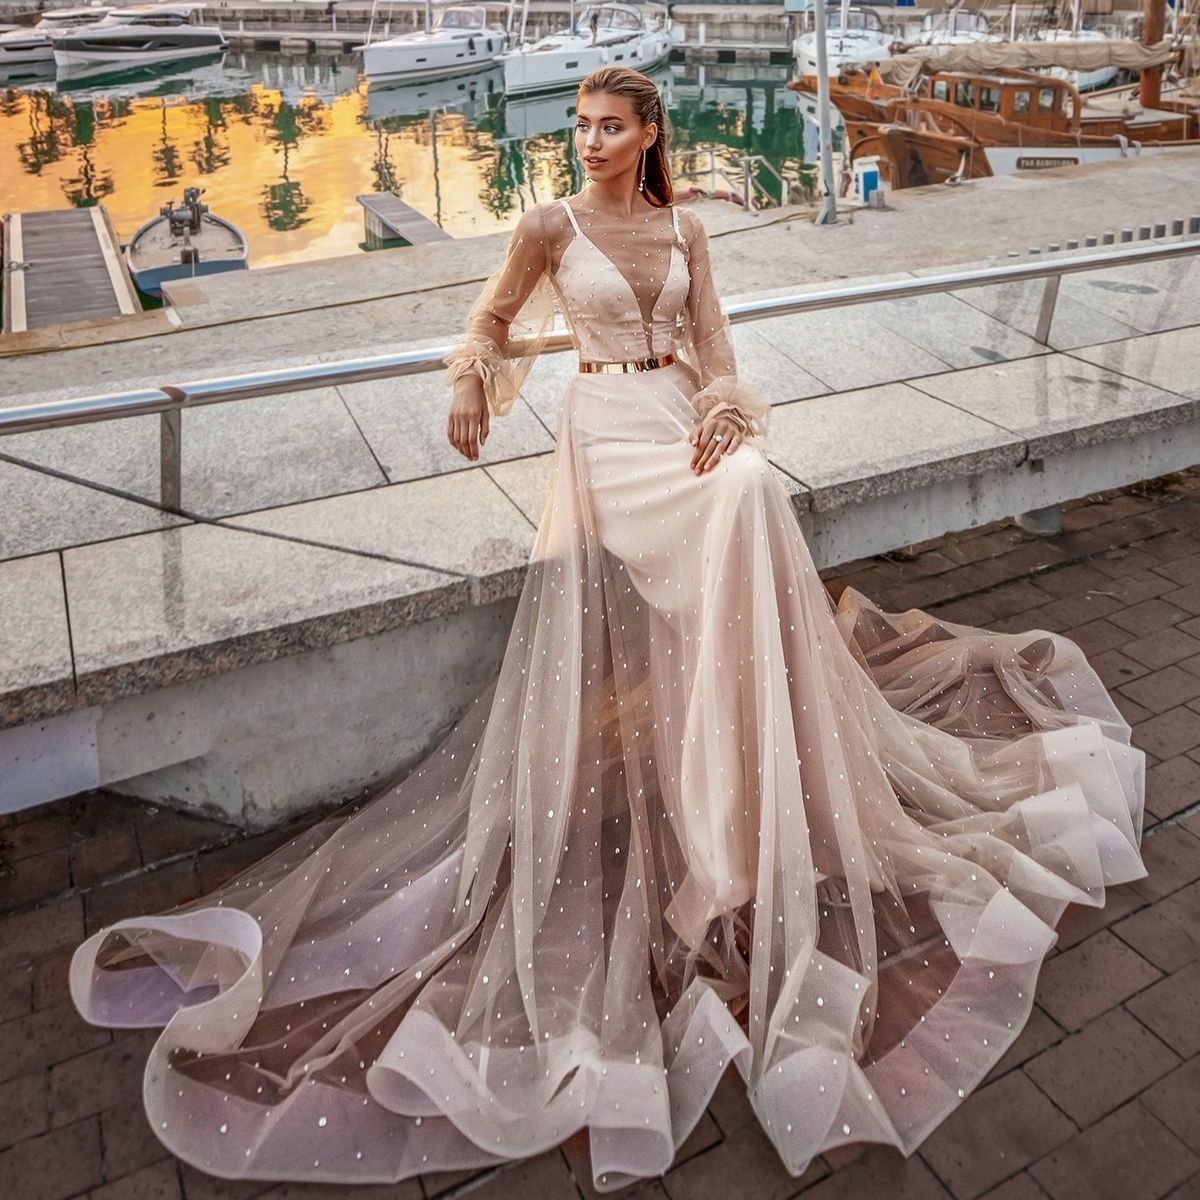 versal 2020 bridal wedding inspirasi featured wedding dress gowns and collection